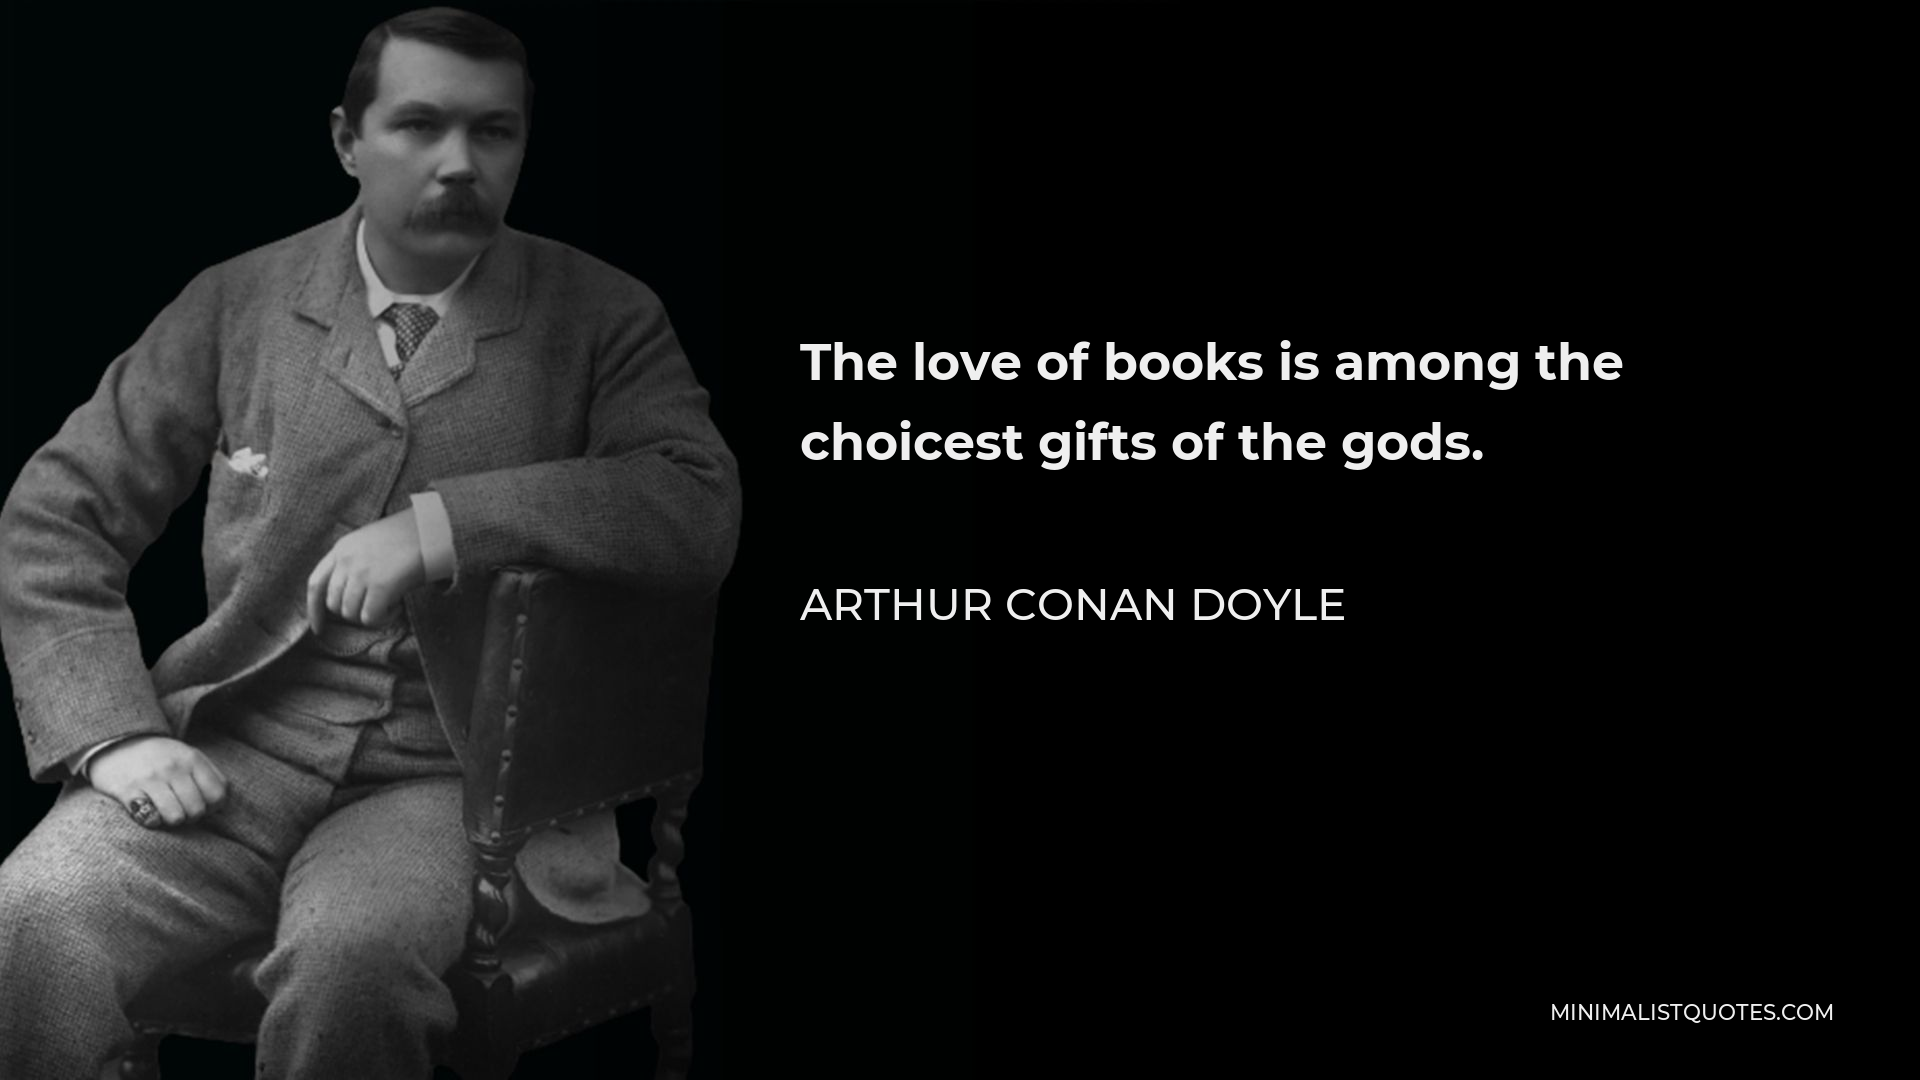 Arthur Conan Doyle Quote - The love of books is among the choicest gifts of the gods.